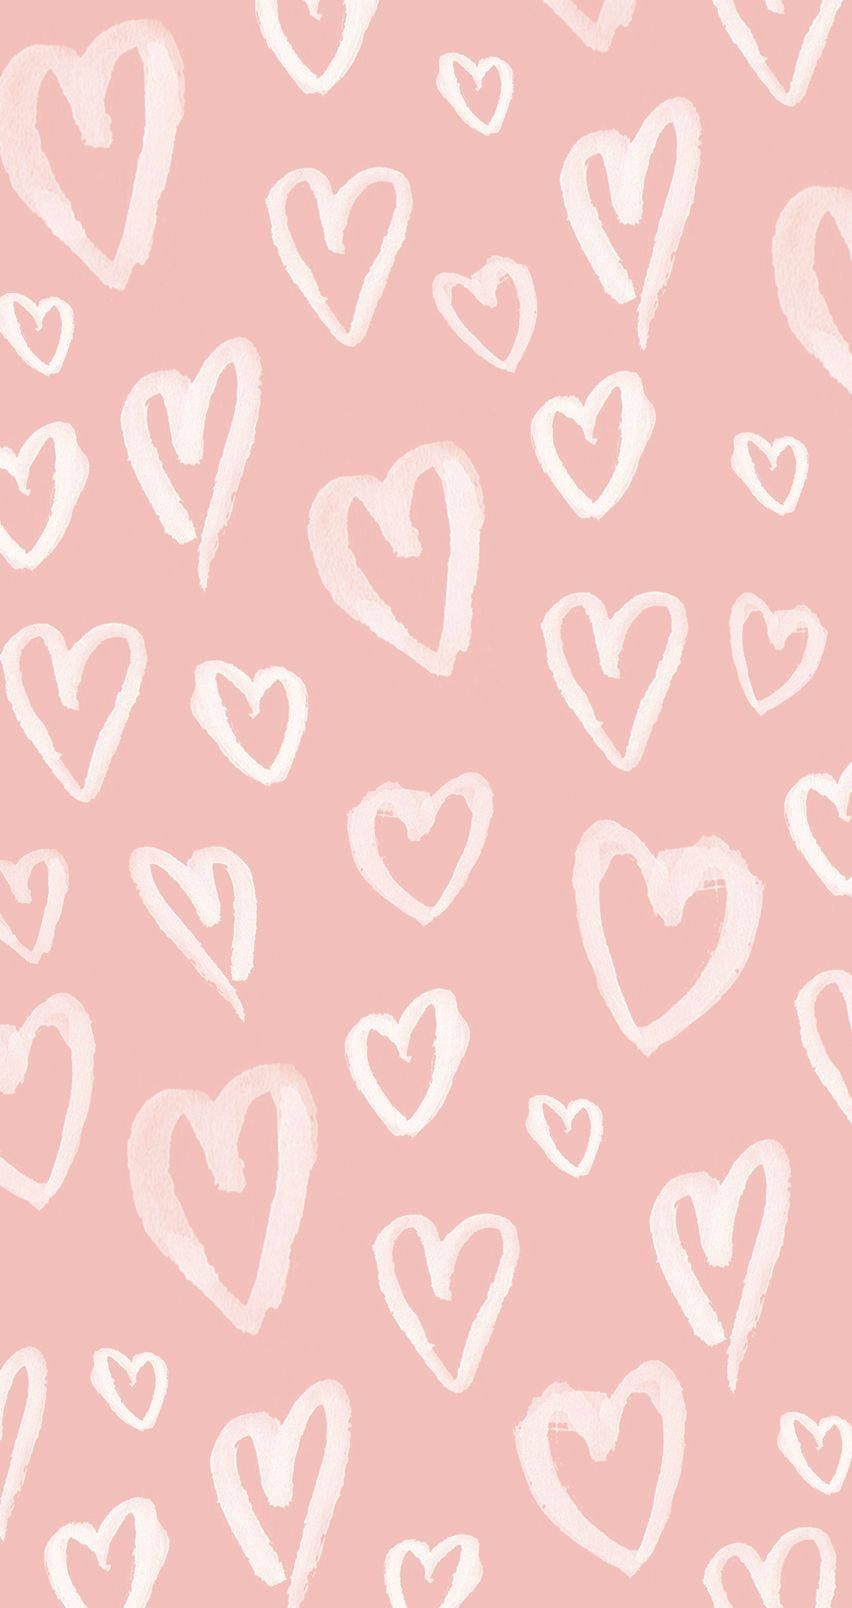 Get the trending pastel pink iPhone and make your phone stylish and unique. Wallpaper